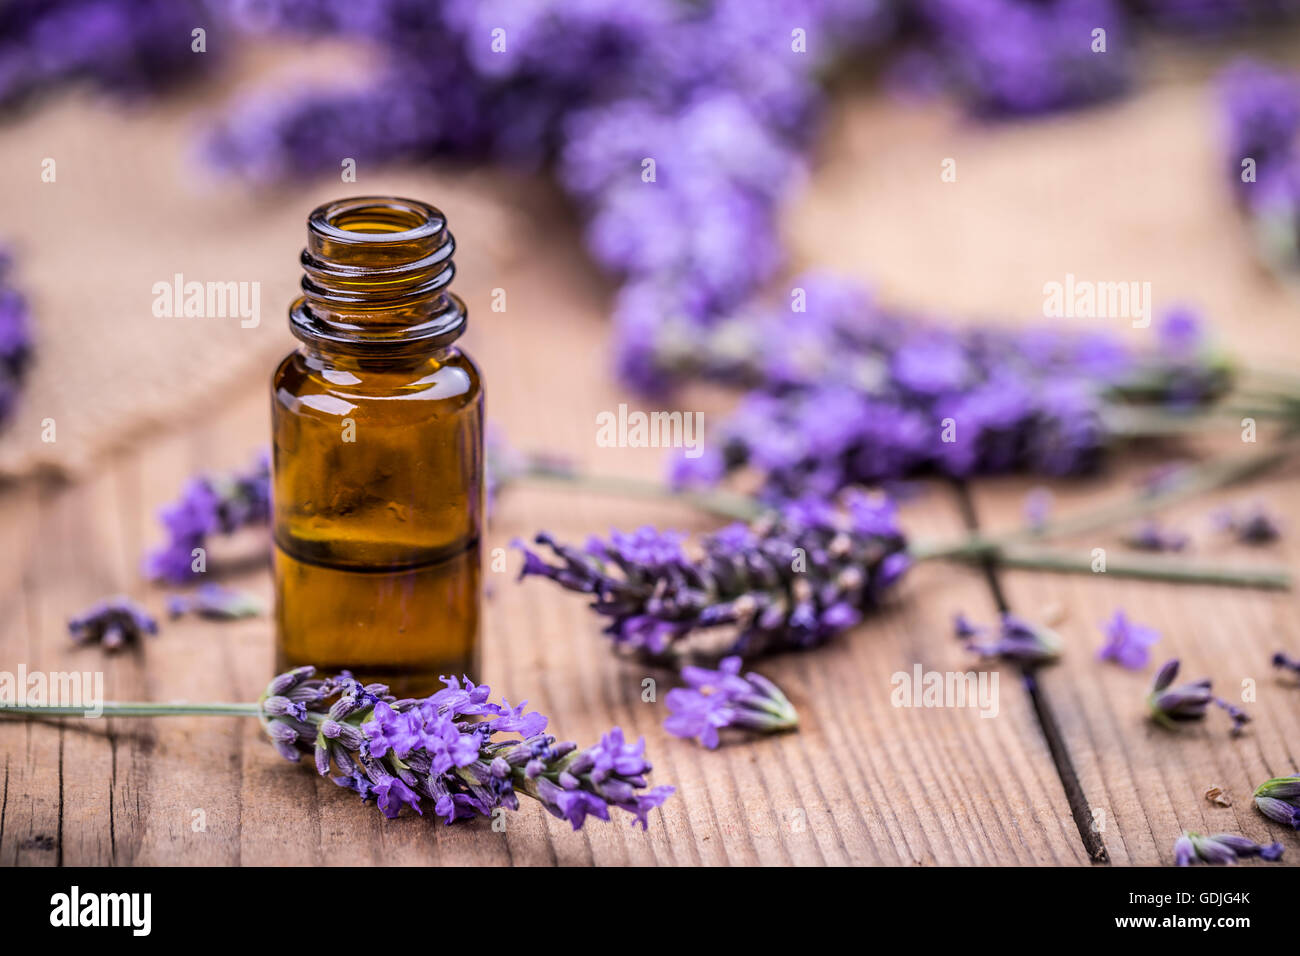 Herbal oil and lavender flowers on wooden background Stock Photo